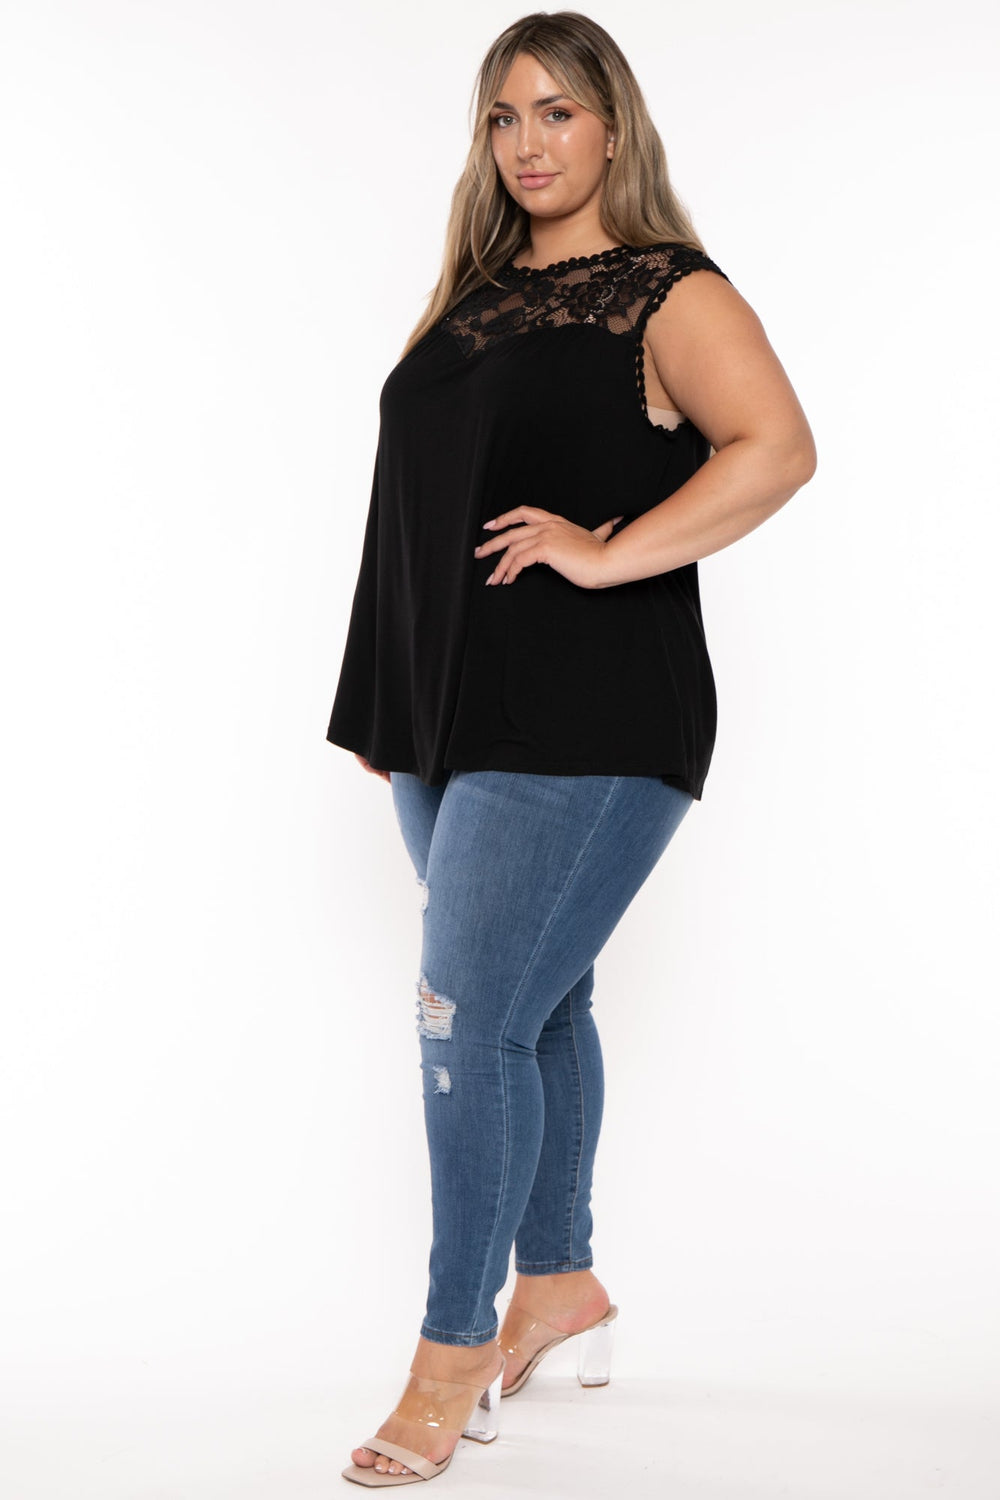 Emerald Tops Plus Size Aylin Sheer Lace Top- Black